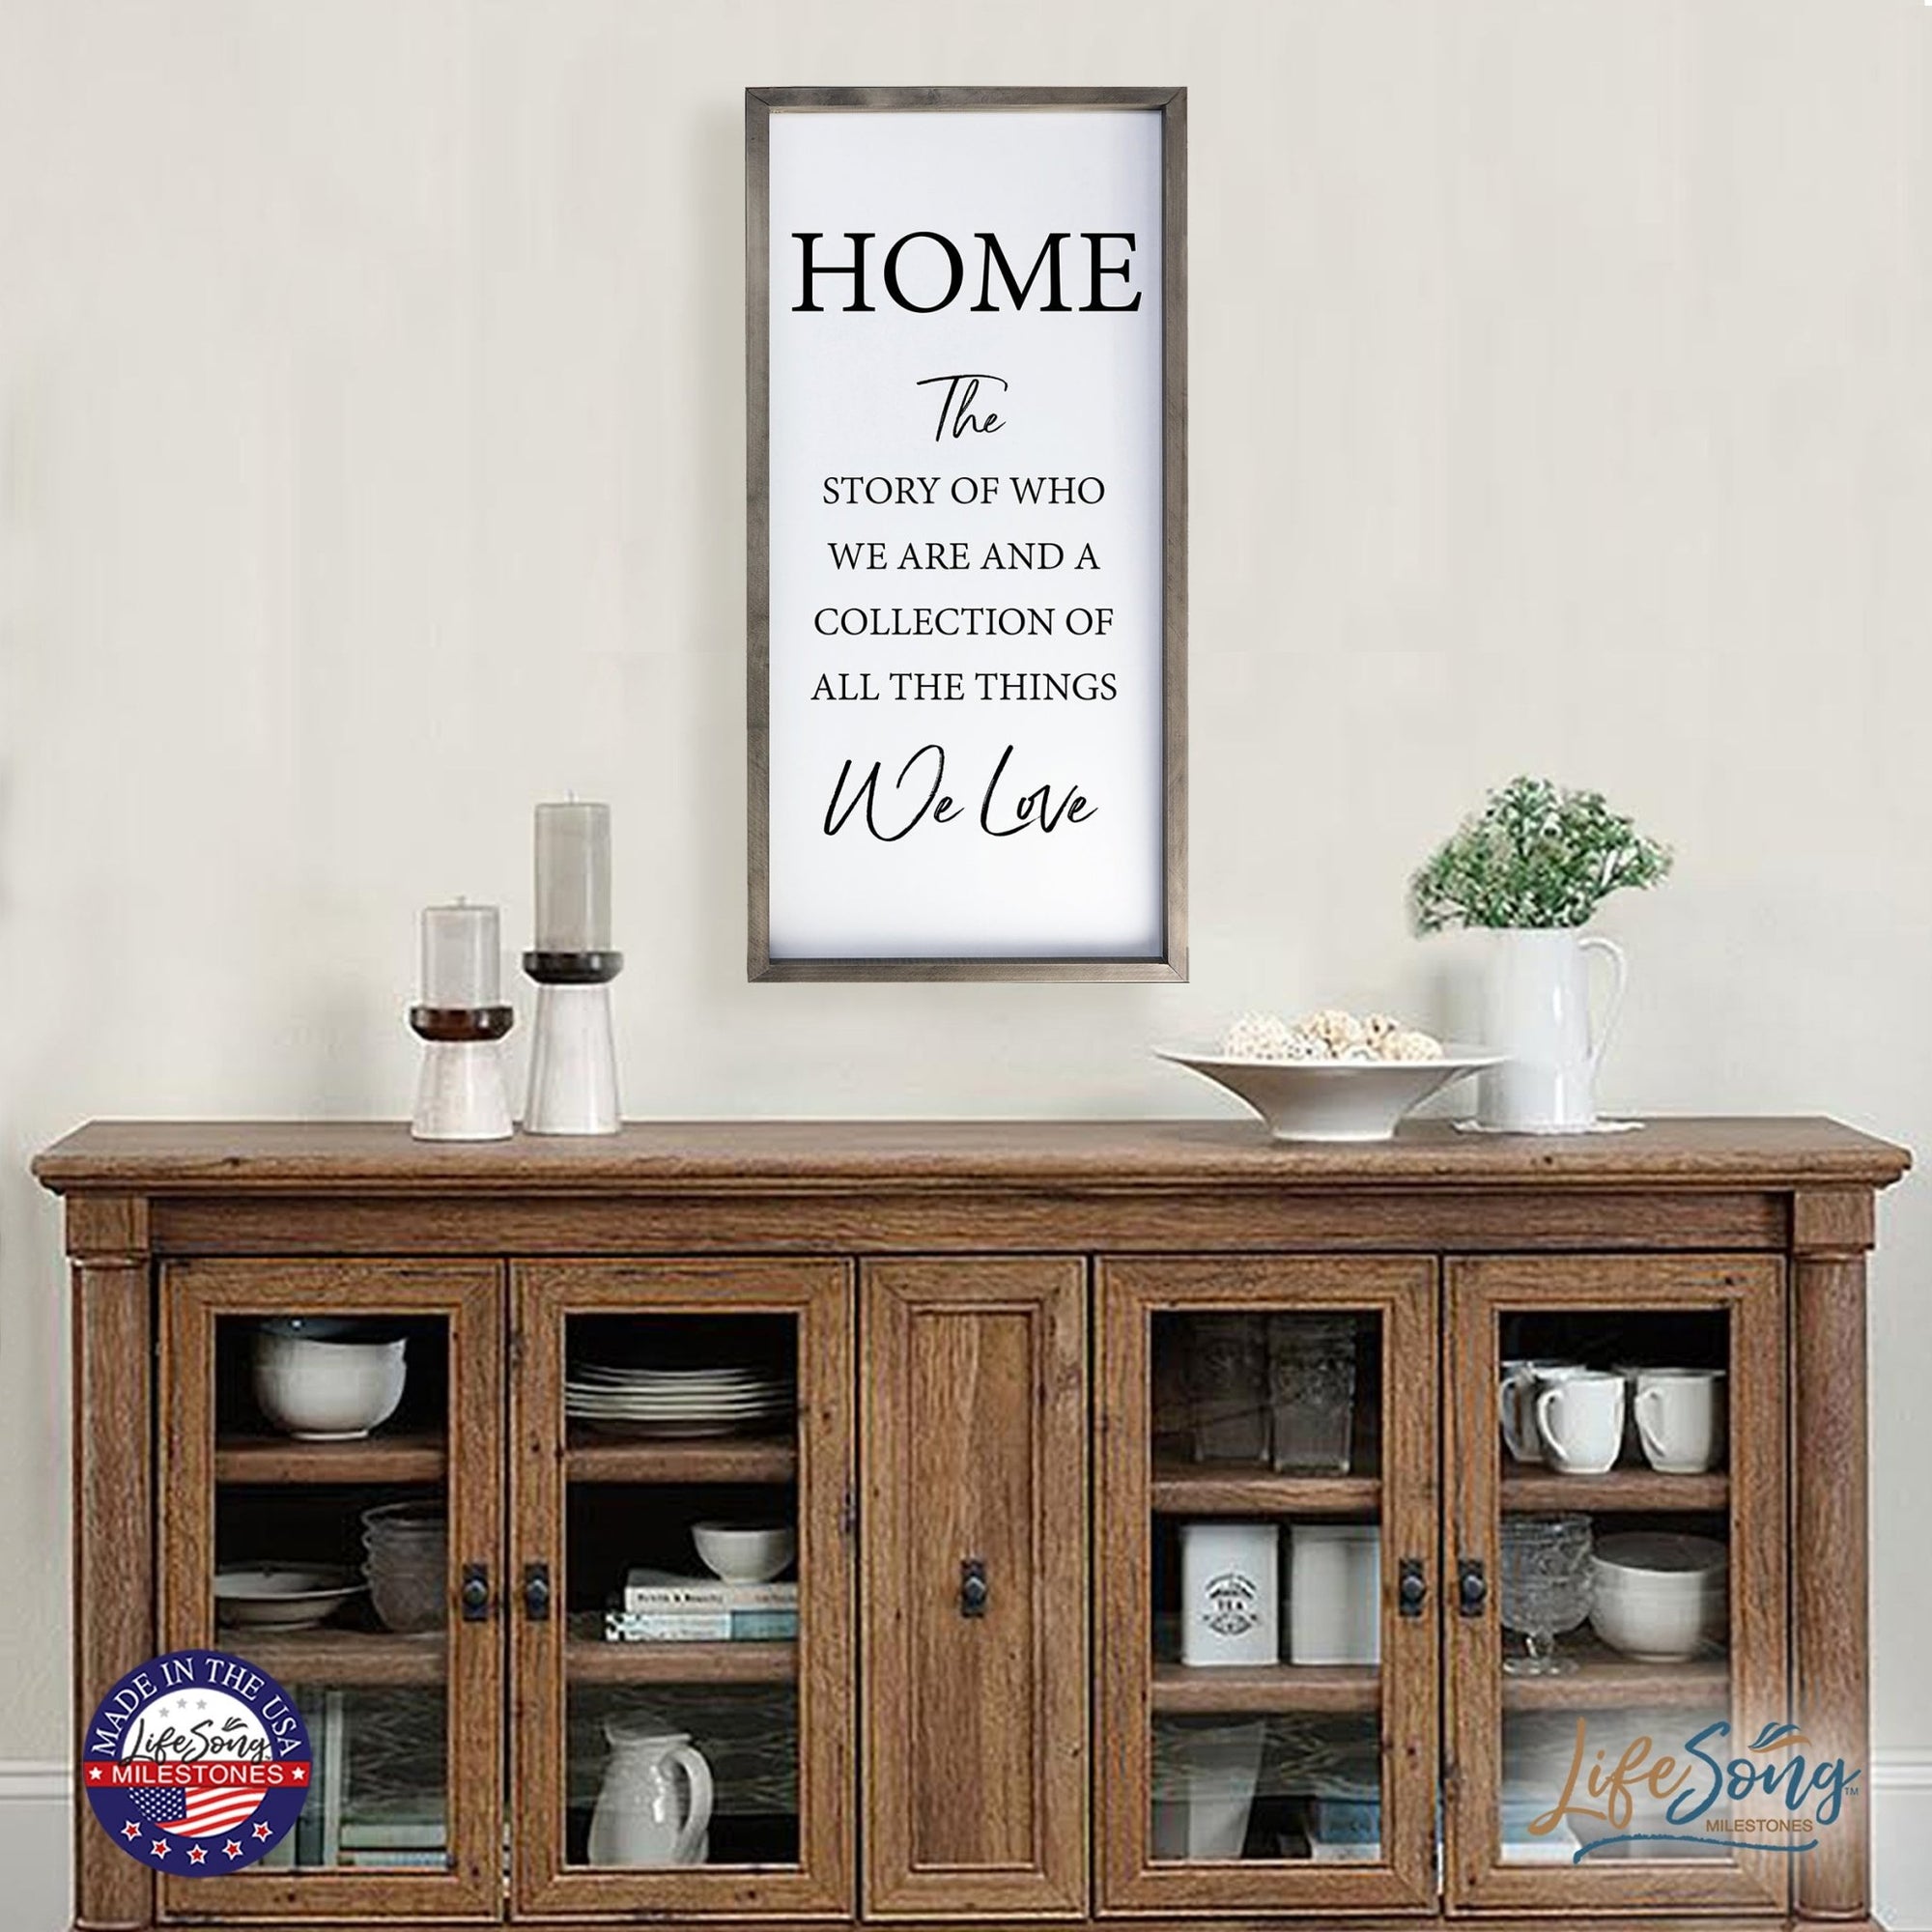 Large Family Wall Decor Quote Sign For Home 18 x 36 - Home The Story Of Who - LifeSong Milestones